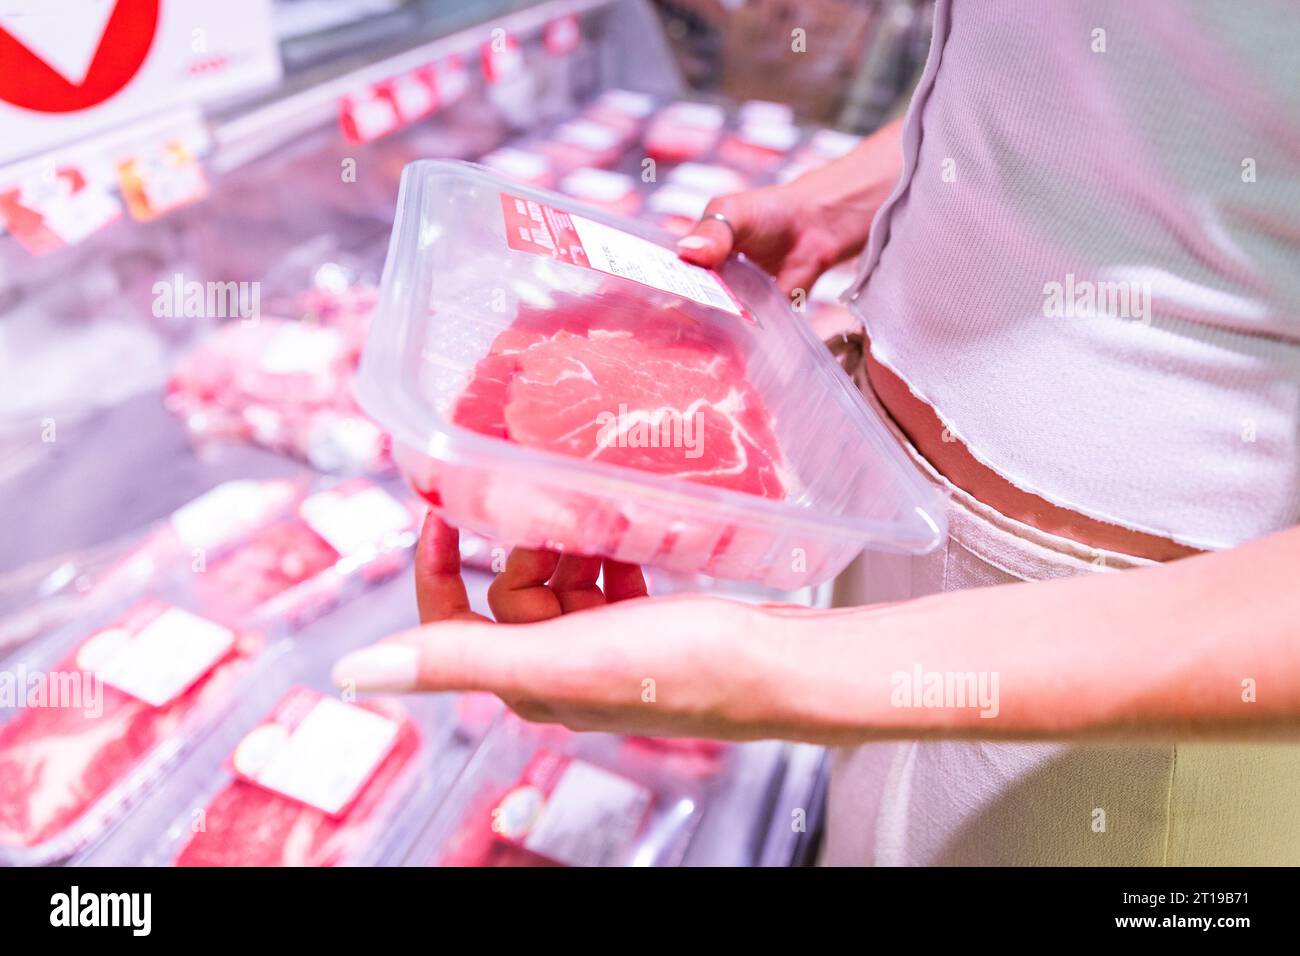 Close-up of the hands of a woman who is choosing the meat to buy at the supermarket Stock Photo